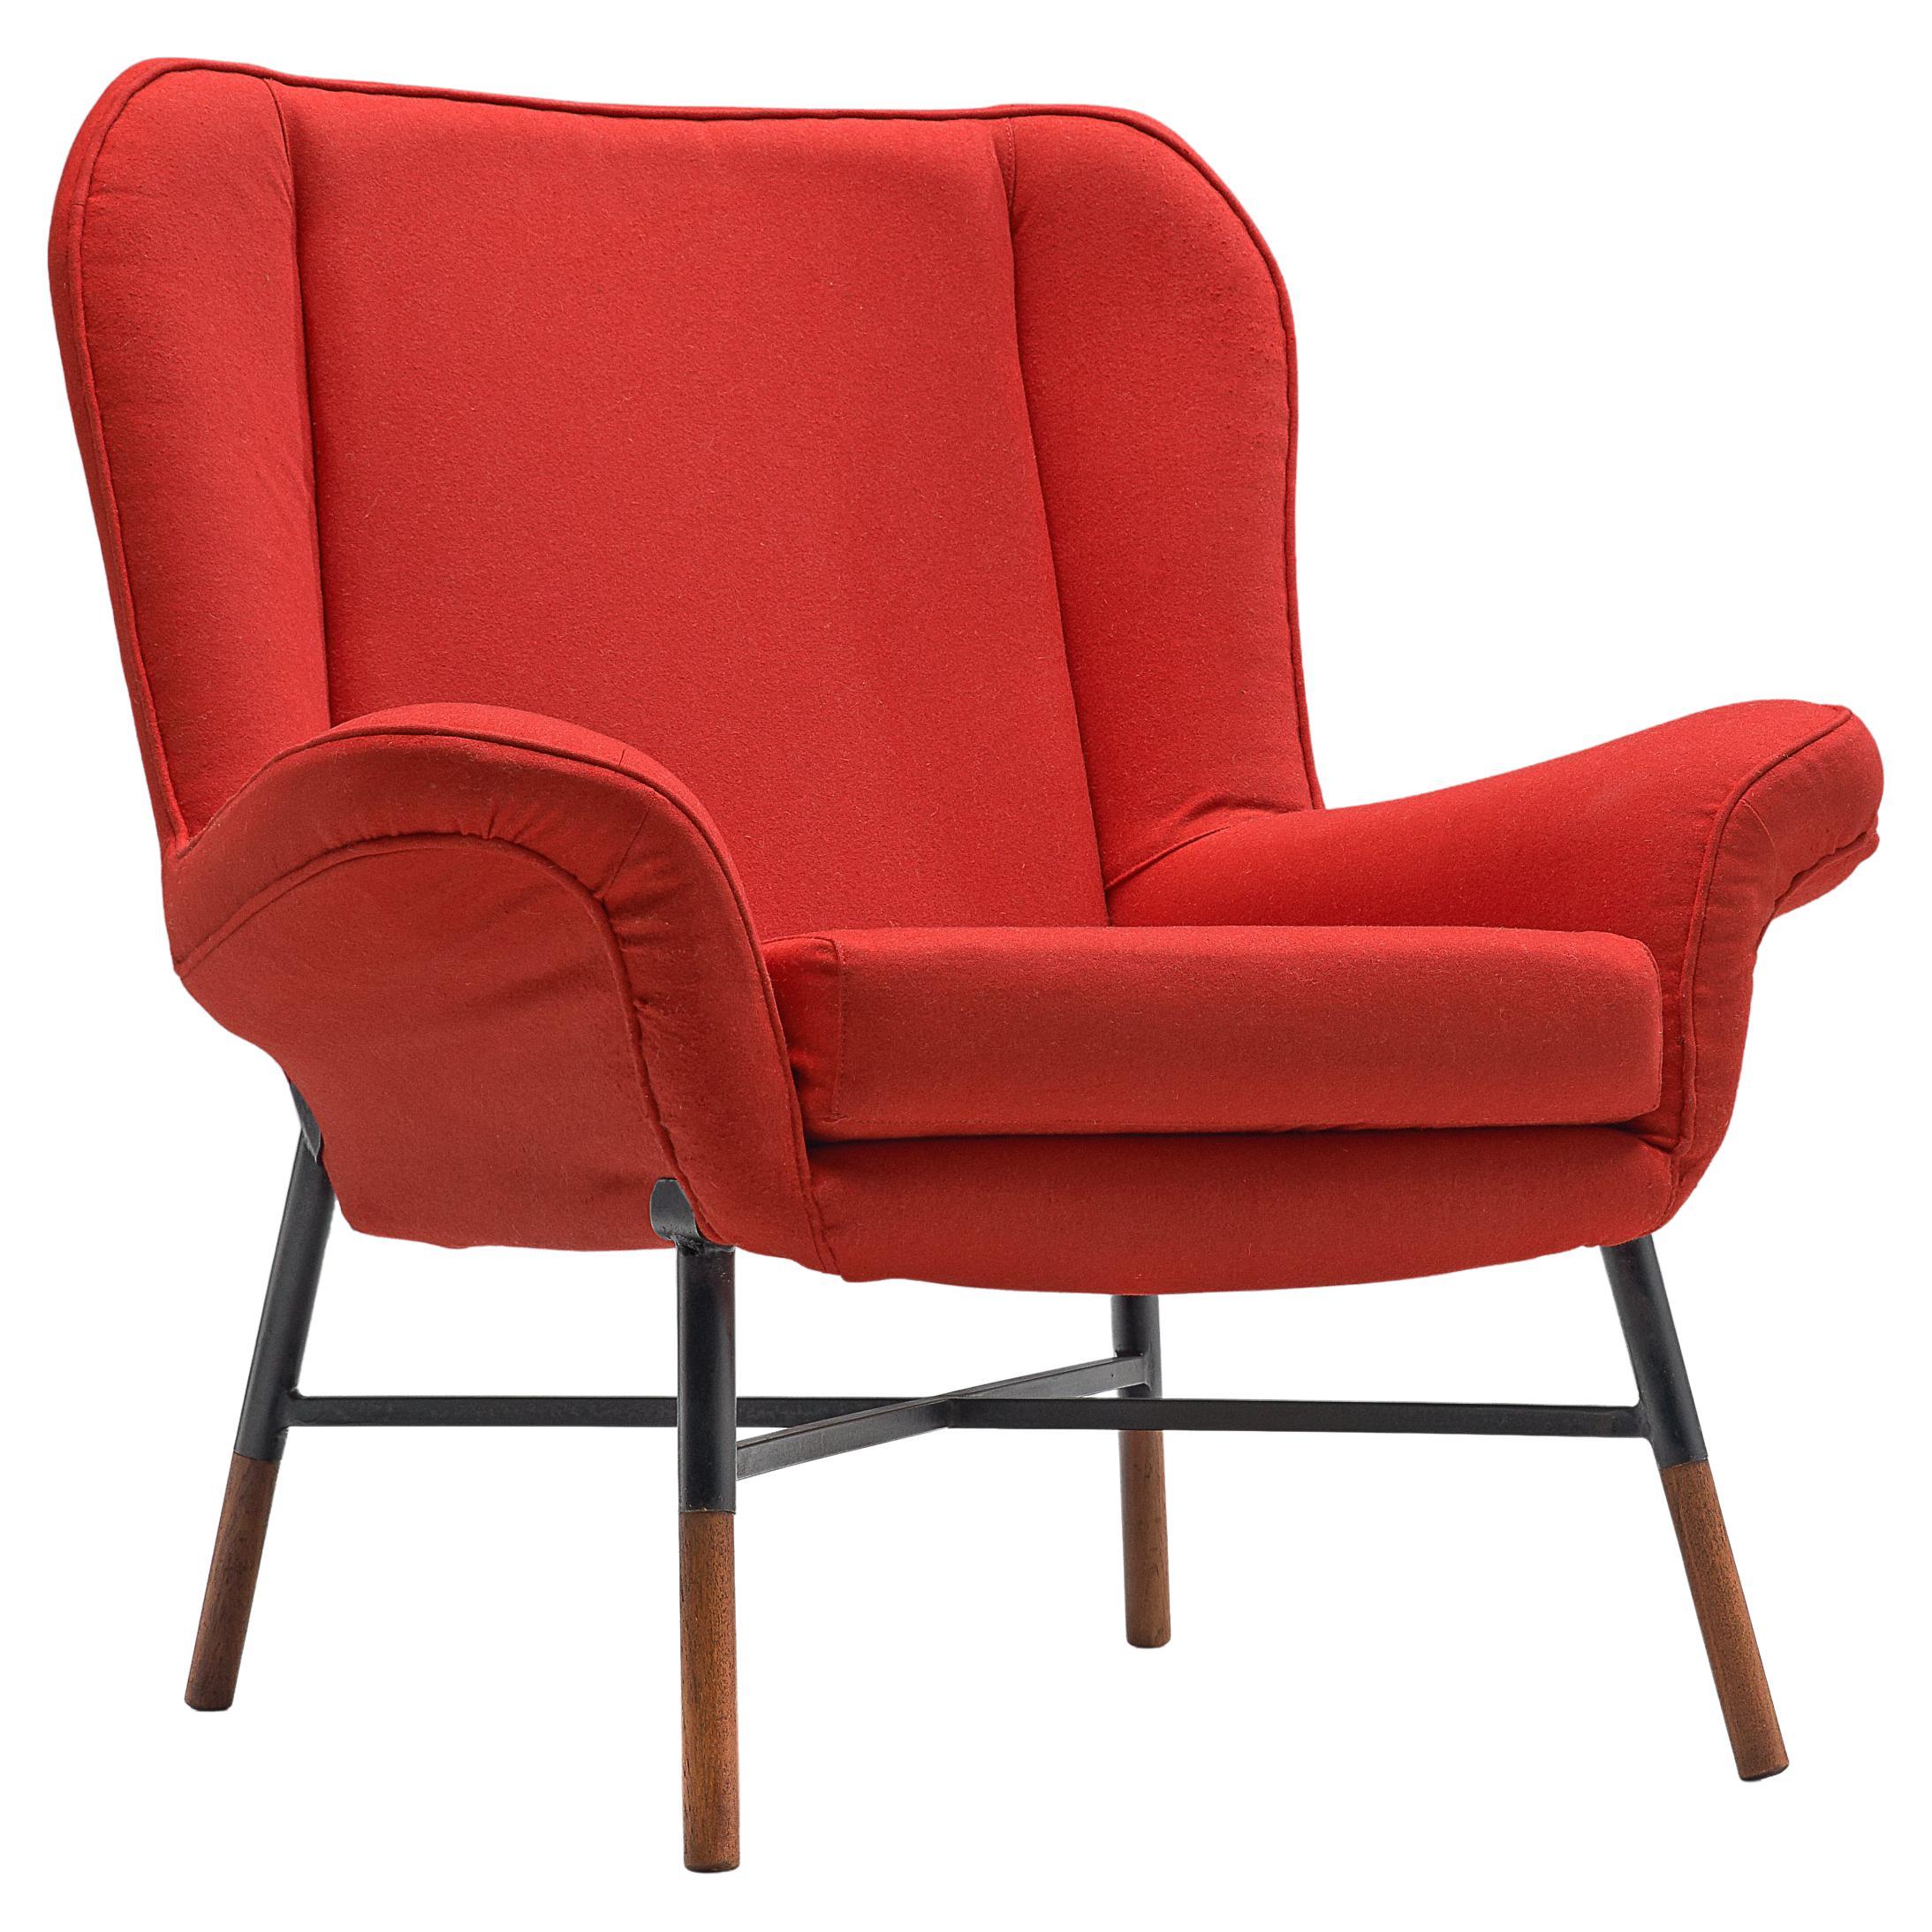 First Edition BBPR 'Giulietta' Lounge Chair in Red Upholstery